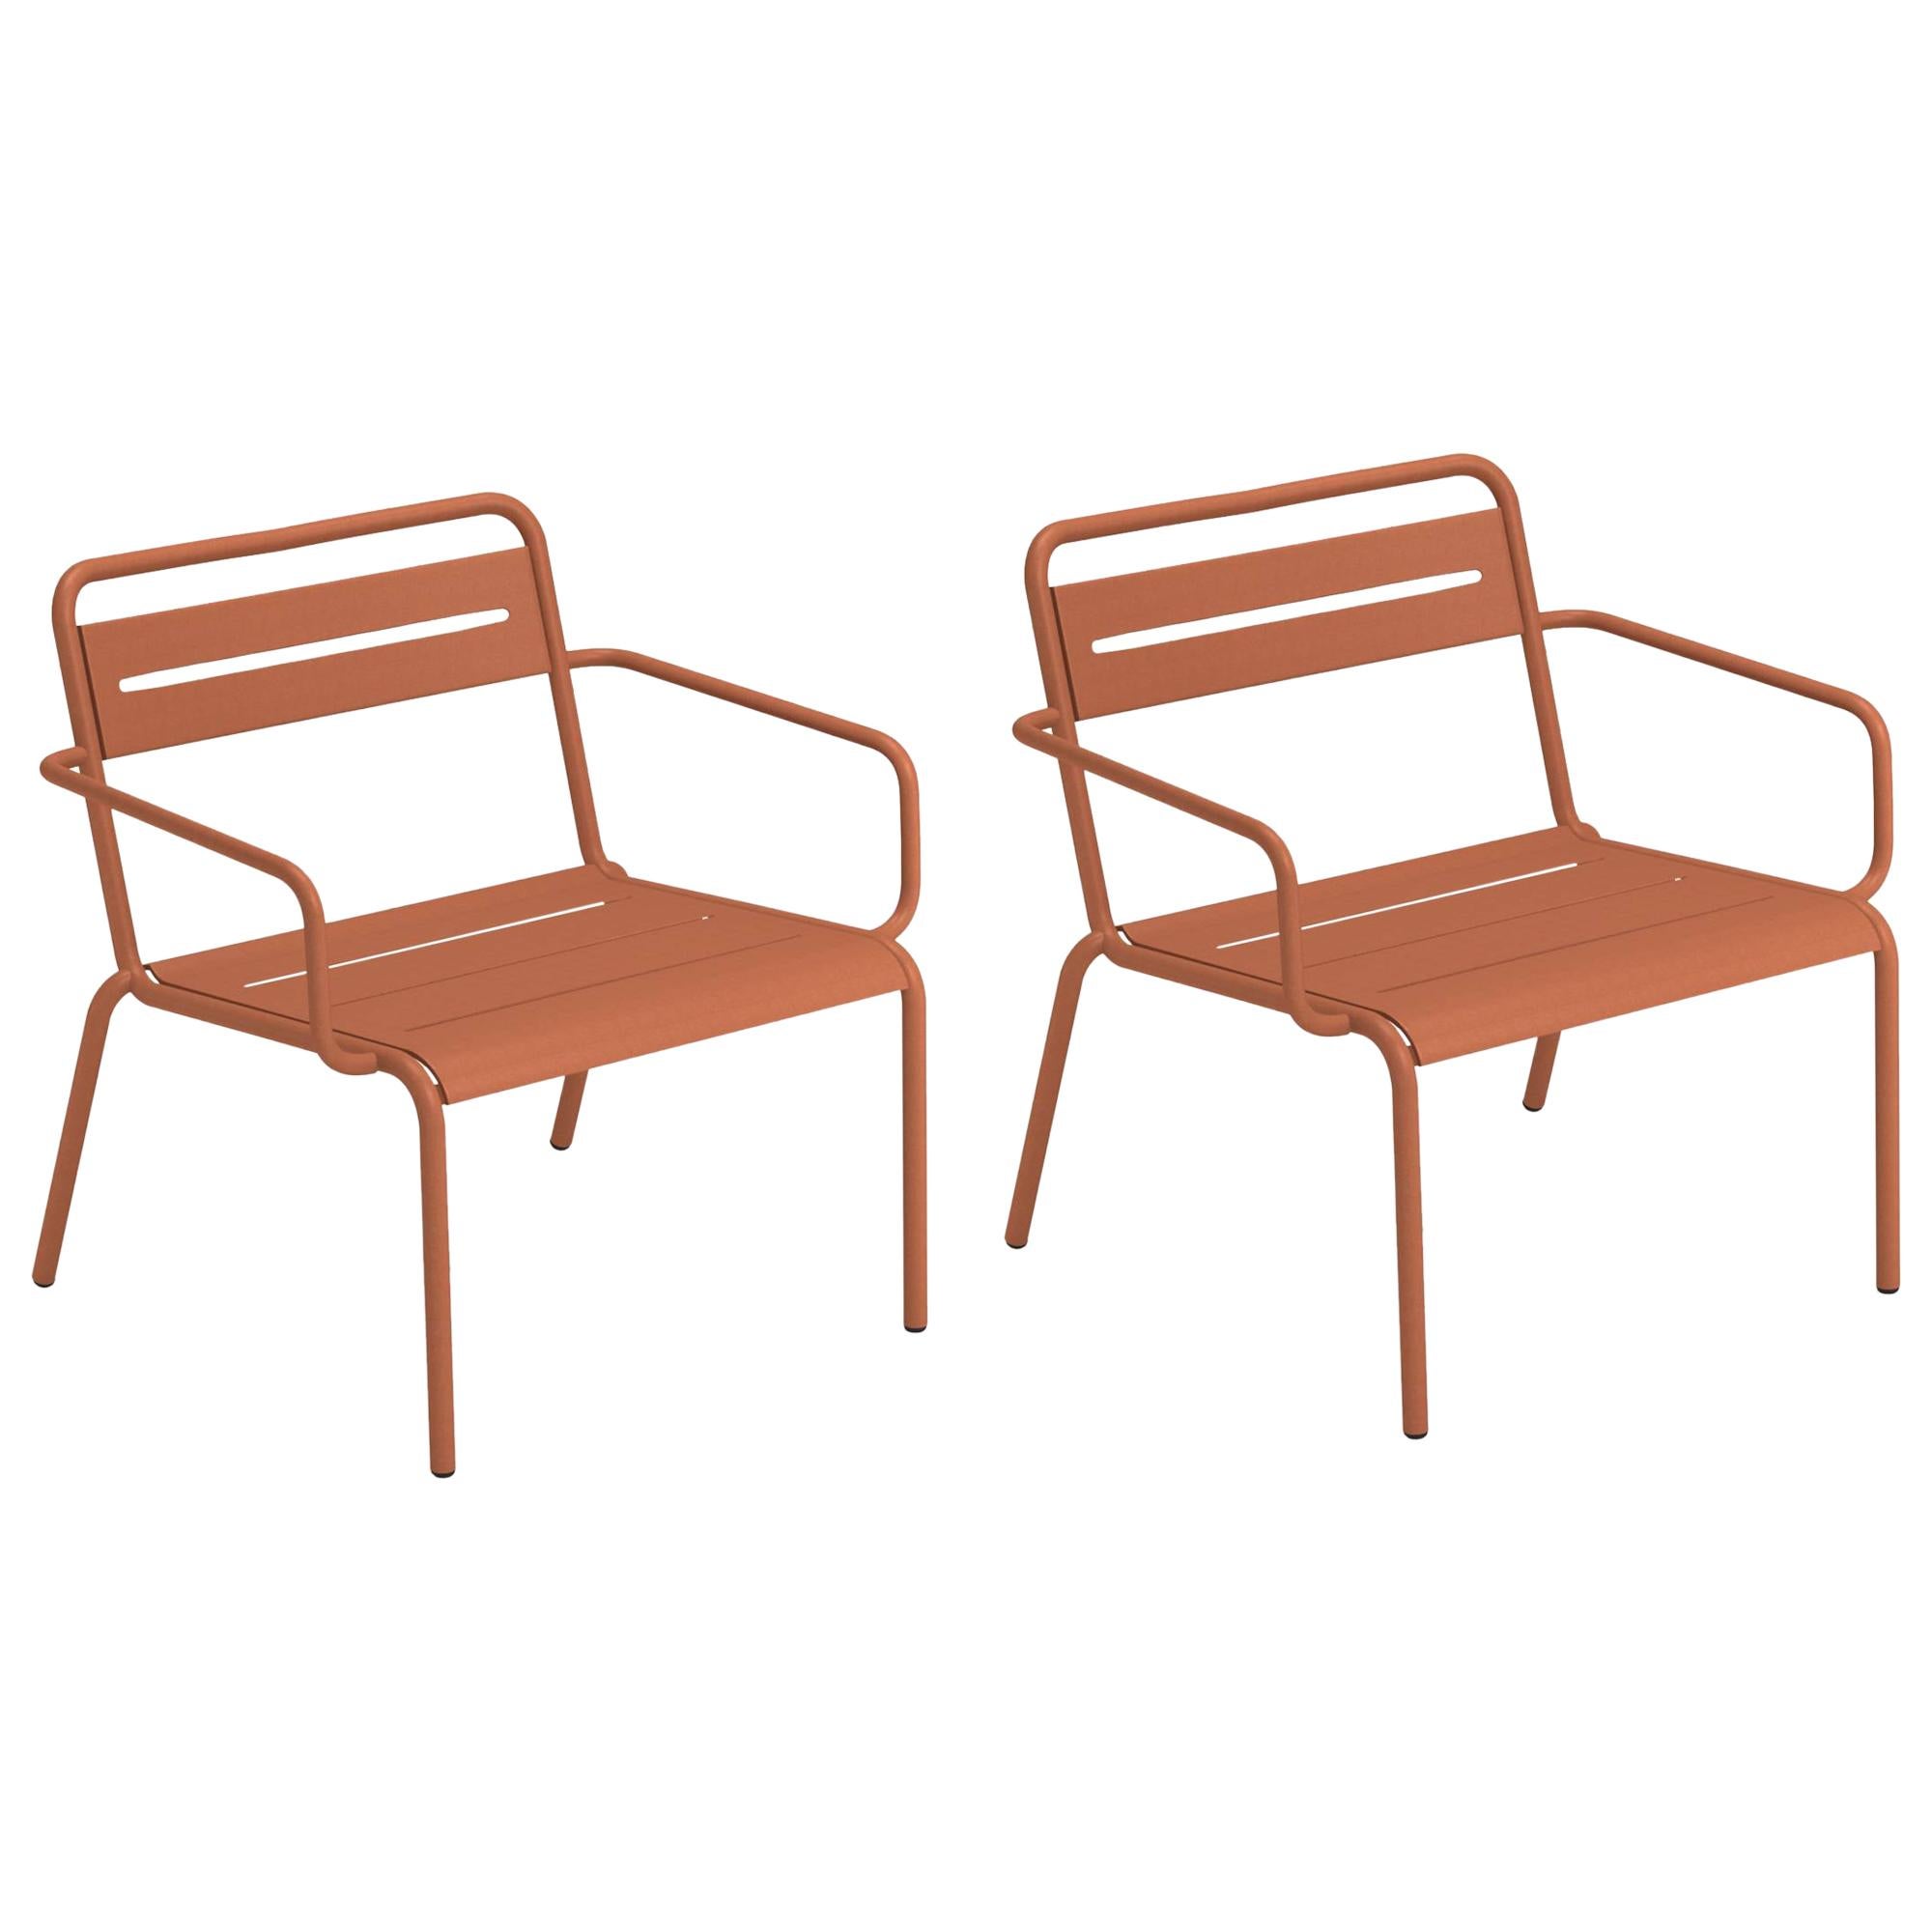 Steel EMU Star Lounge Chair, Set of 2 Items For Sale